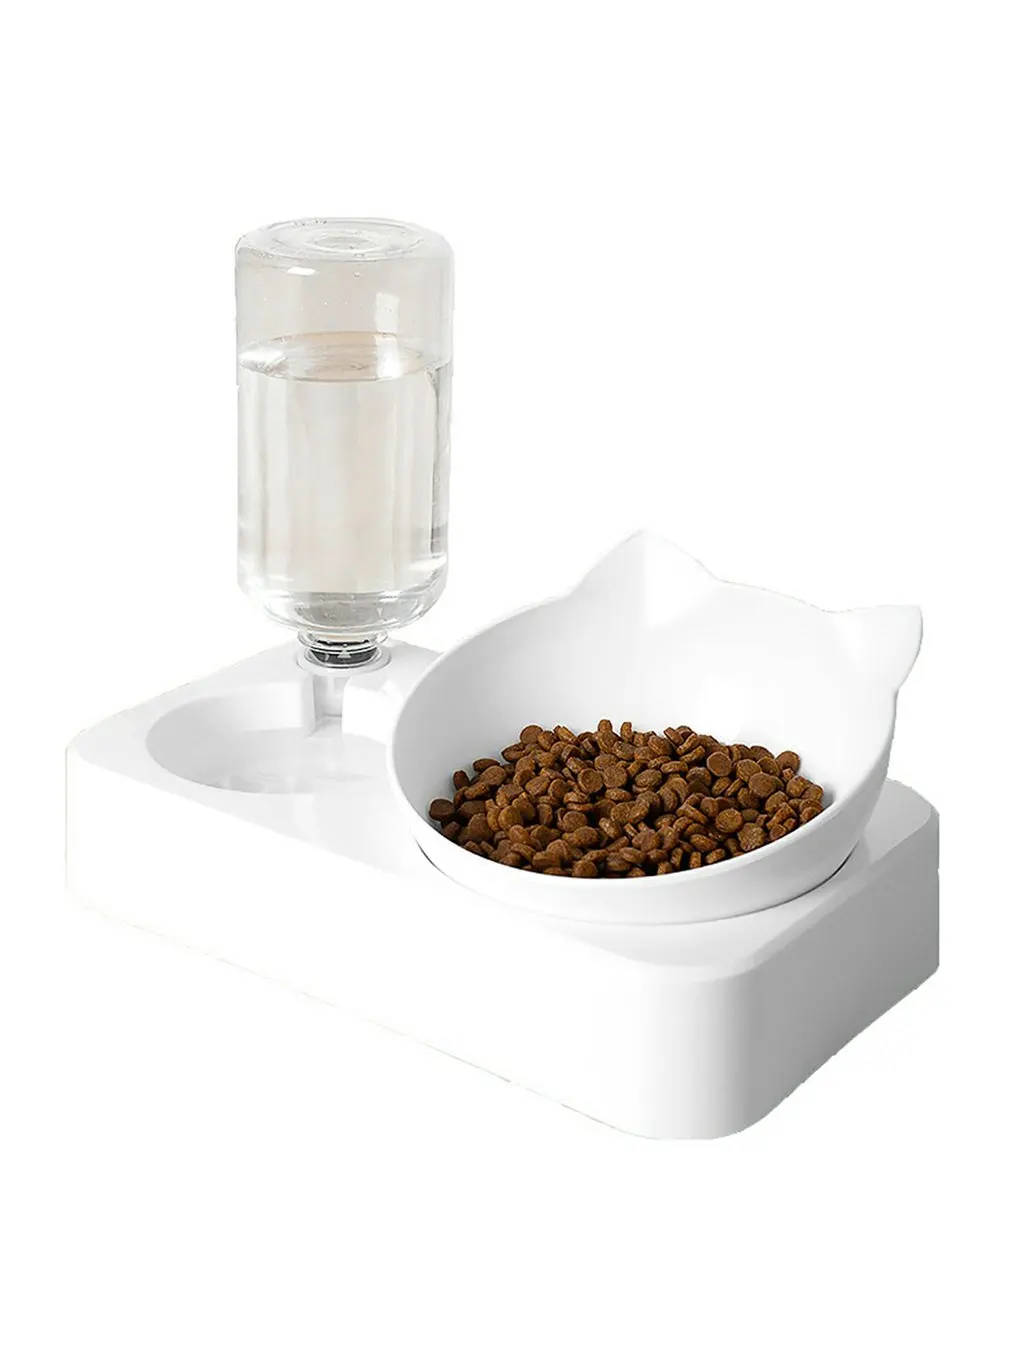 

Gravity Water And Food Bowls Cat Water Food Bowl 0-15Adjustable Tilted Water And Food Bowl Set For Cat